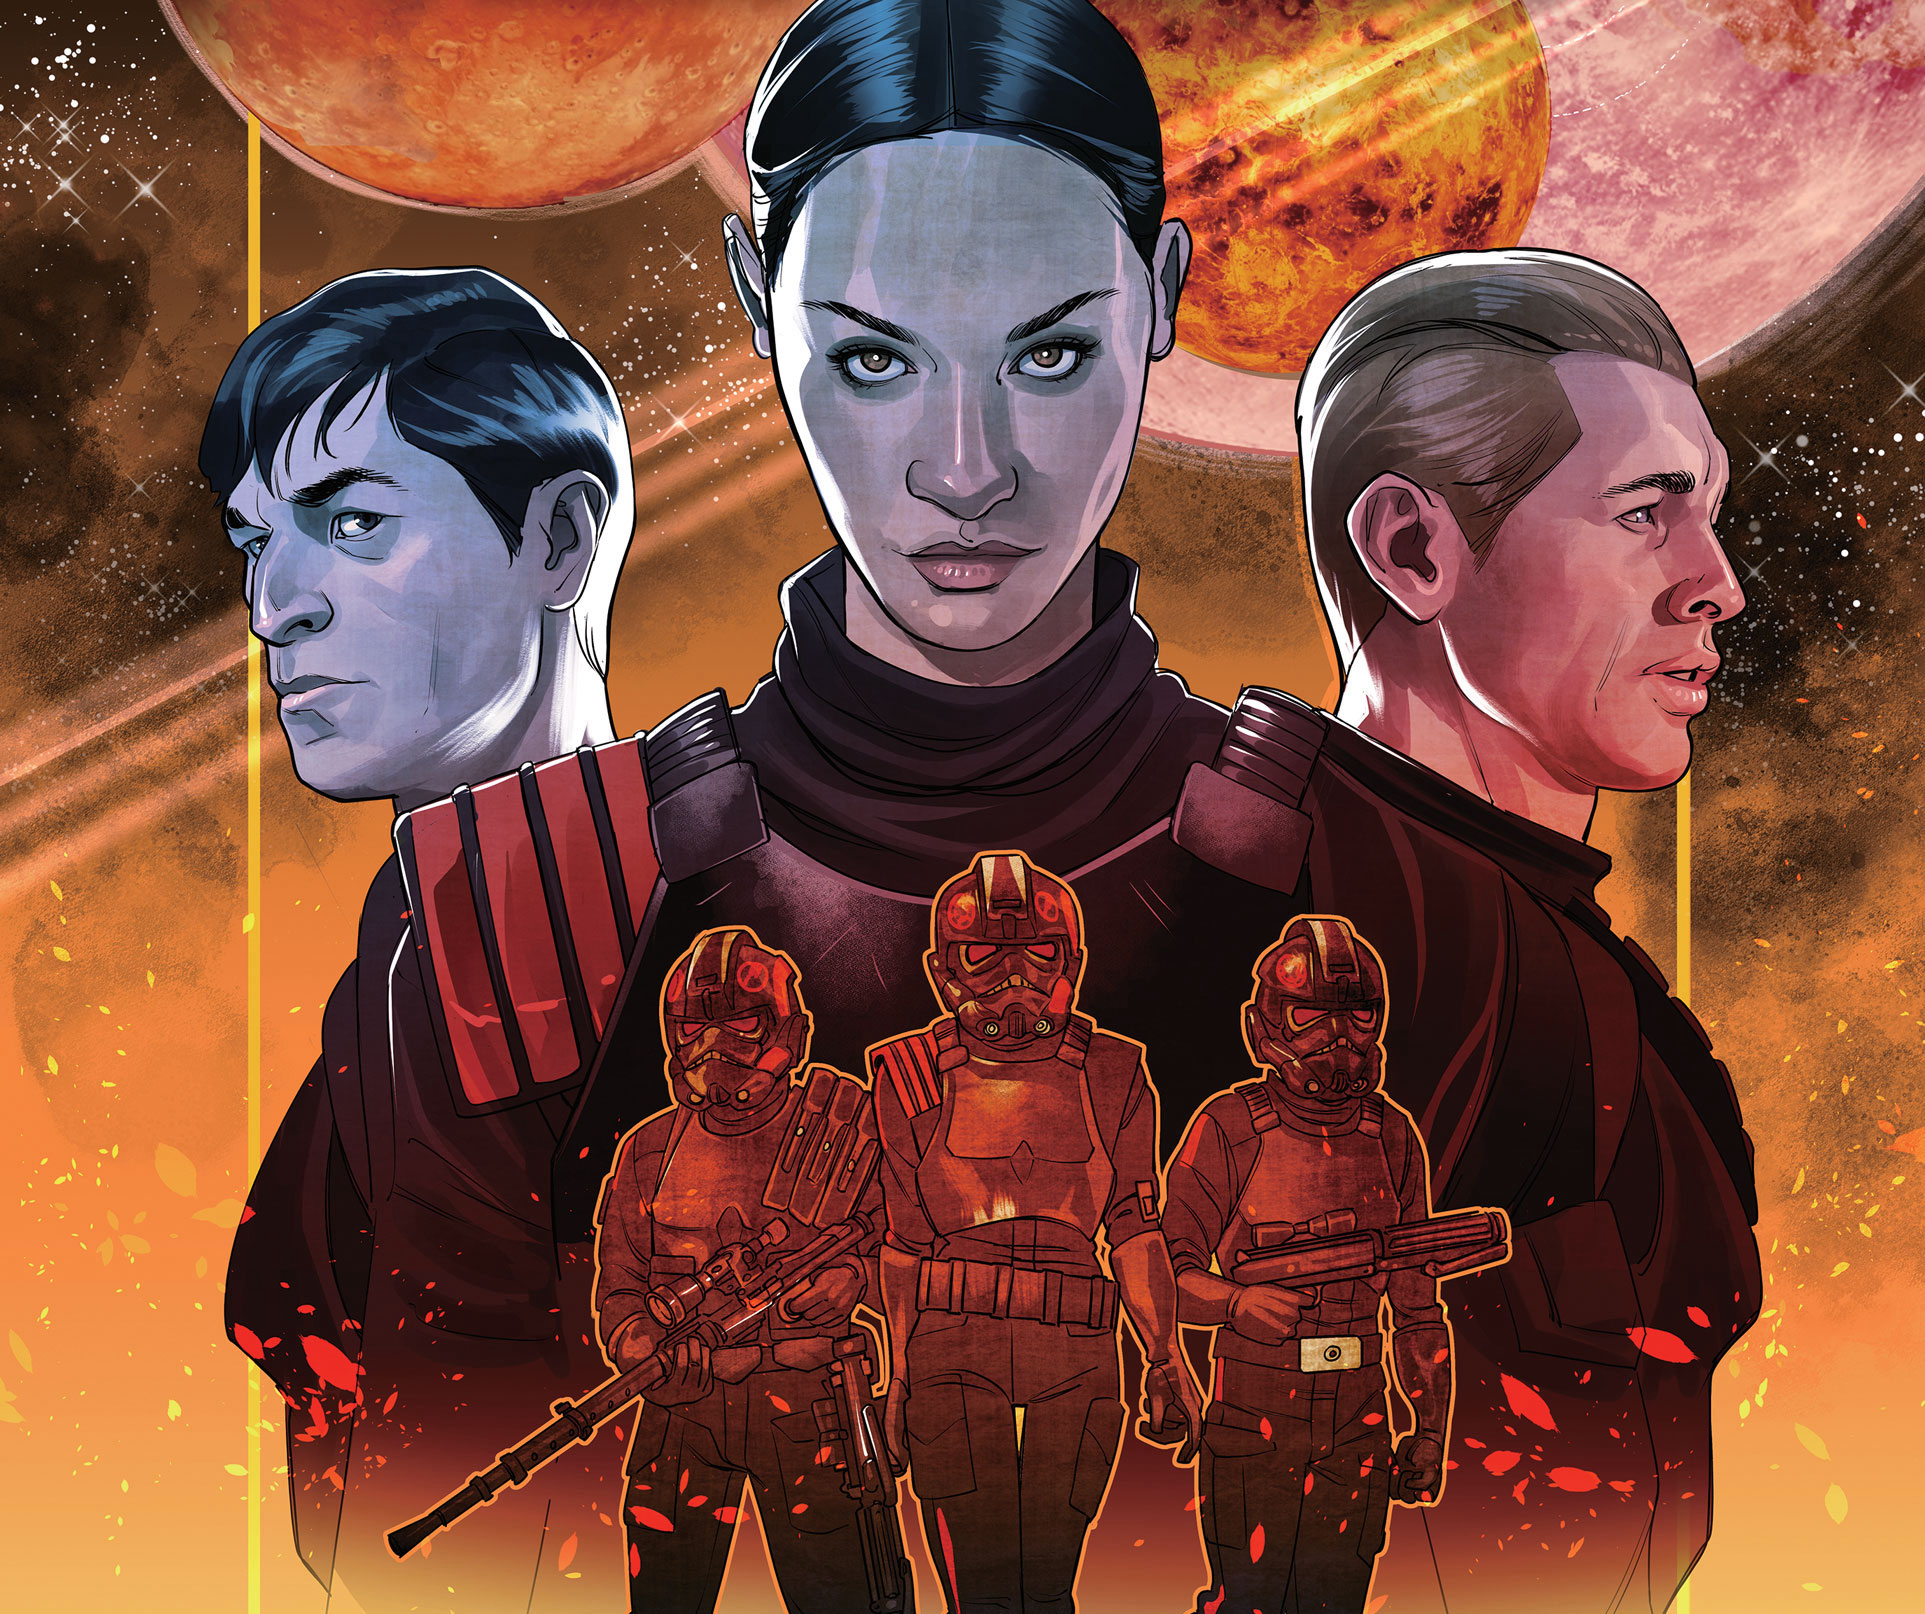 'Star Wars: Battlefront II' comes to comics with 'Star Wars: Bounty Hunters' #32